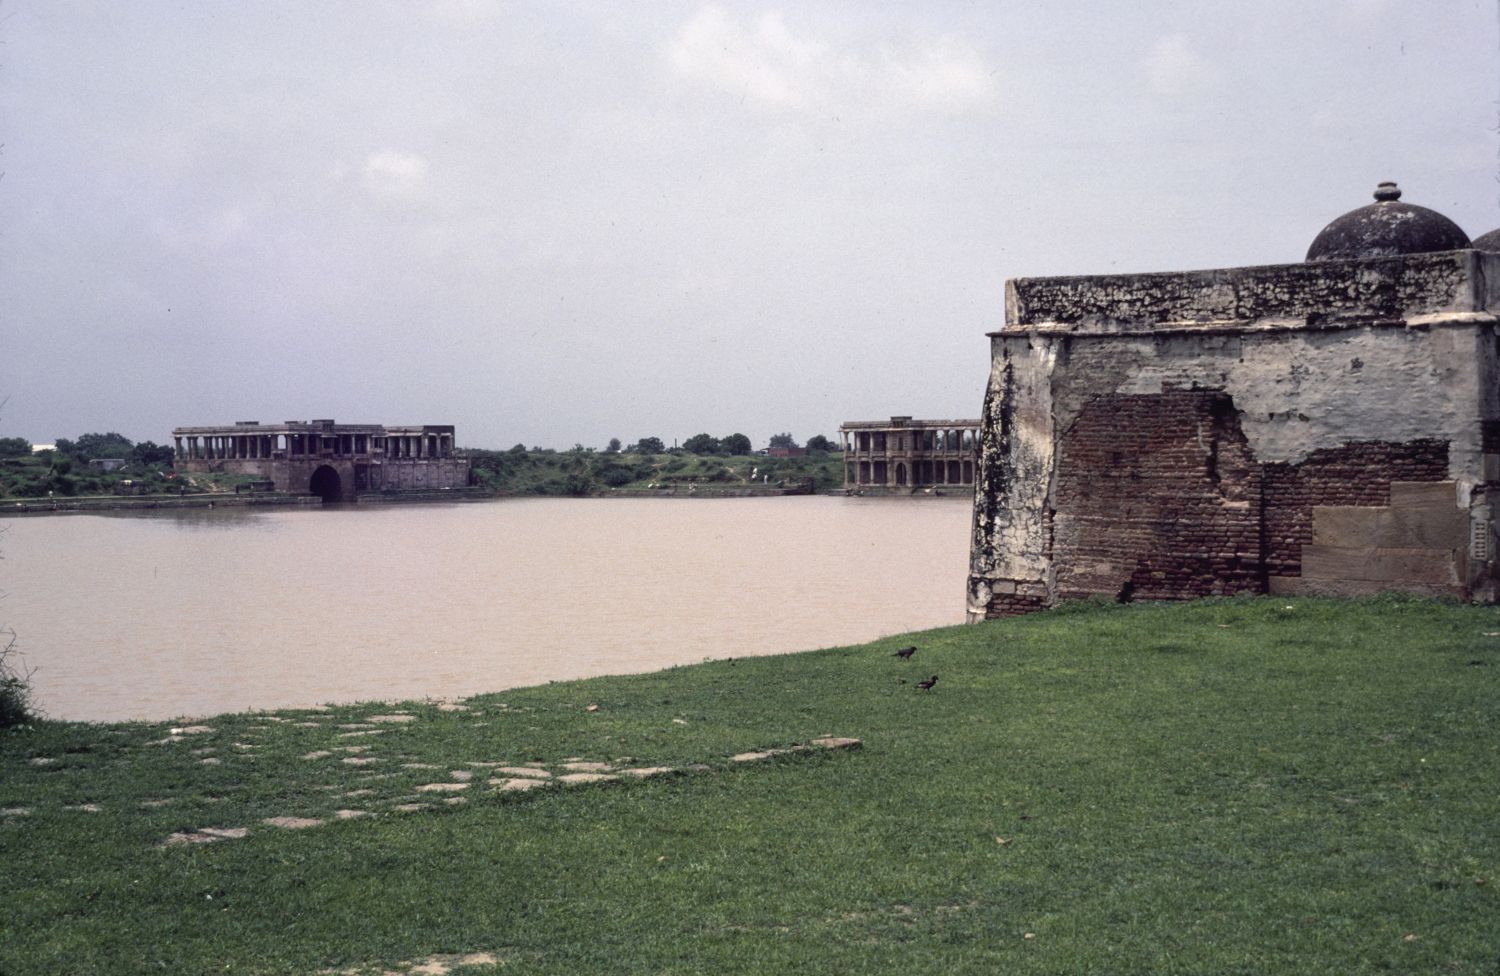 View across tank from northeastern corner toward palaces of Mahmud Shah on south and west banks.